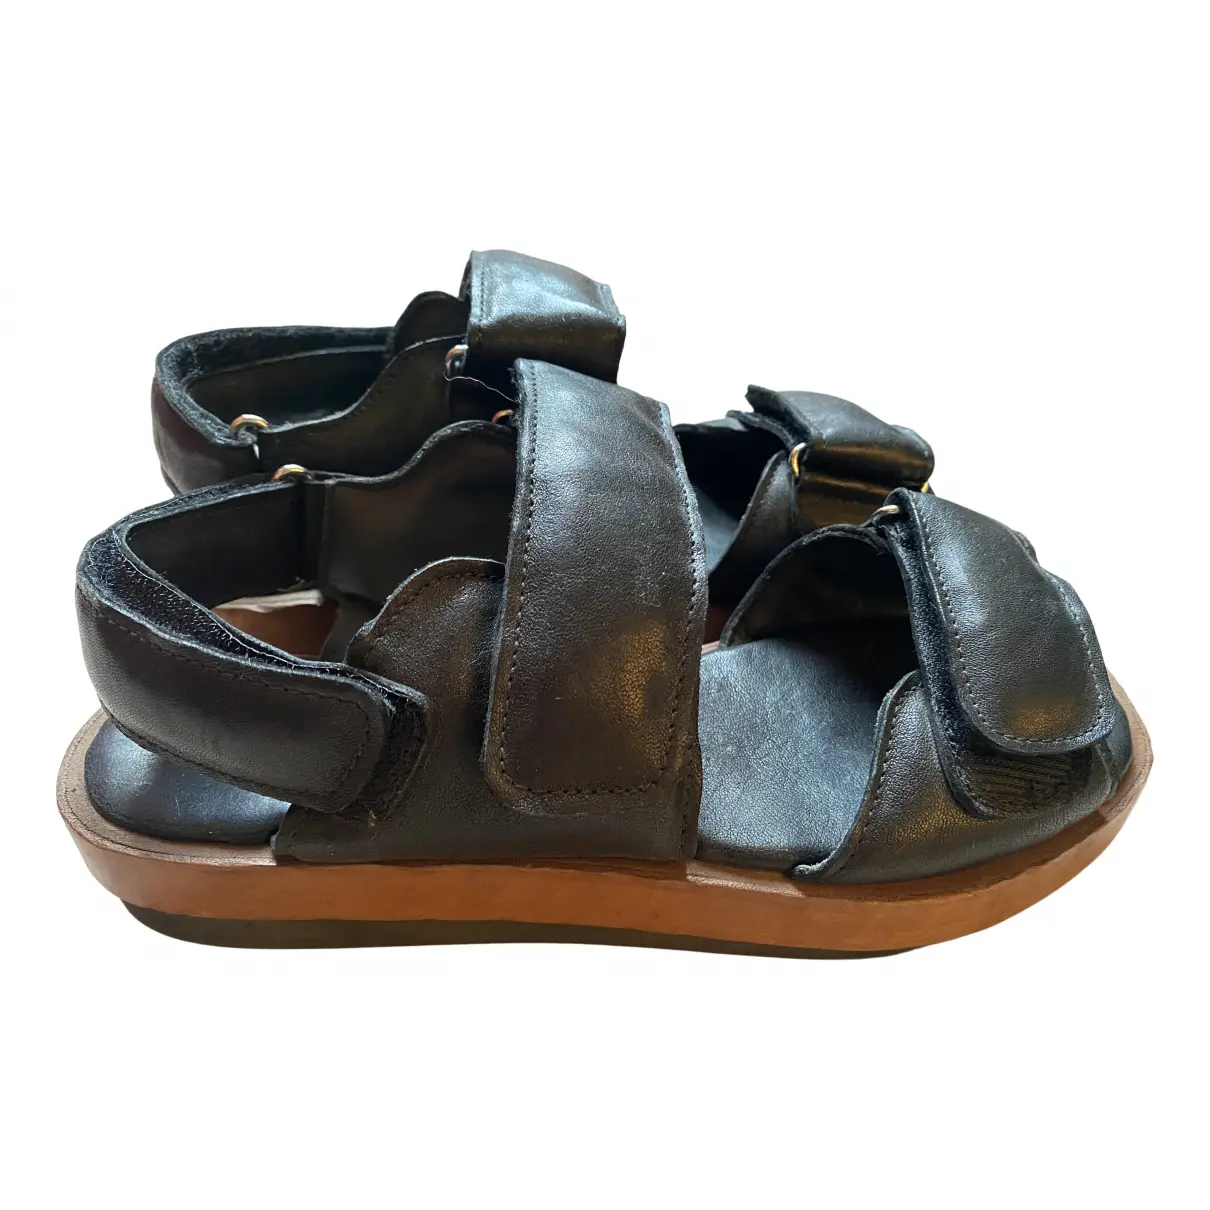 Leather sandals Moma